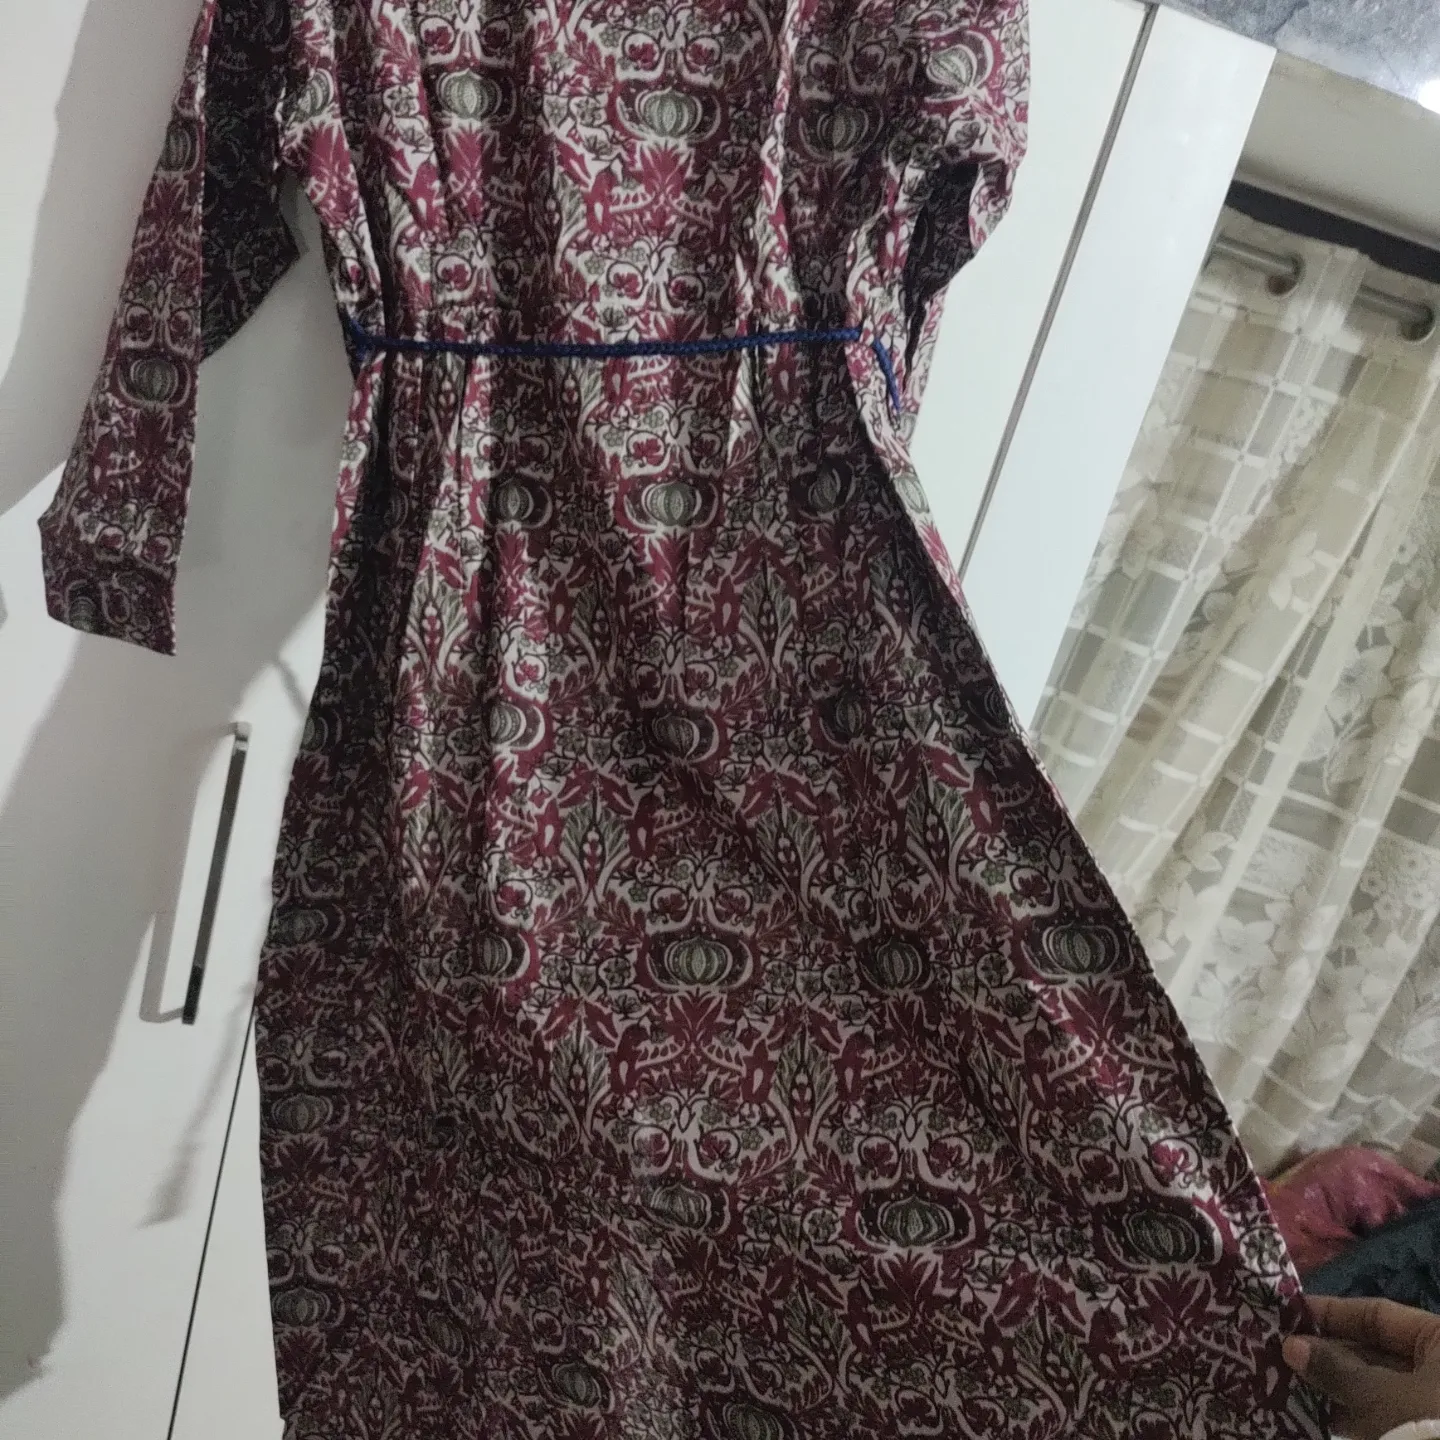 Post image Branded shirt style kurti cotten fabric price only 540/- size xl m available